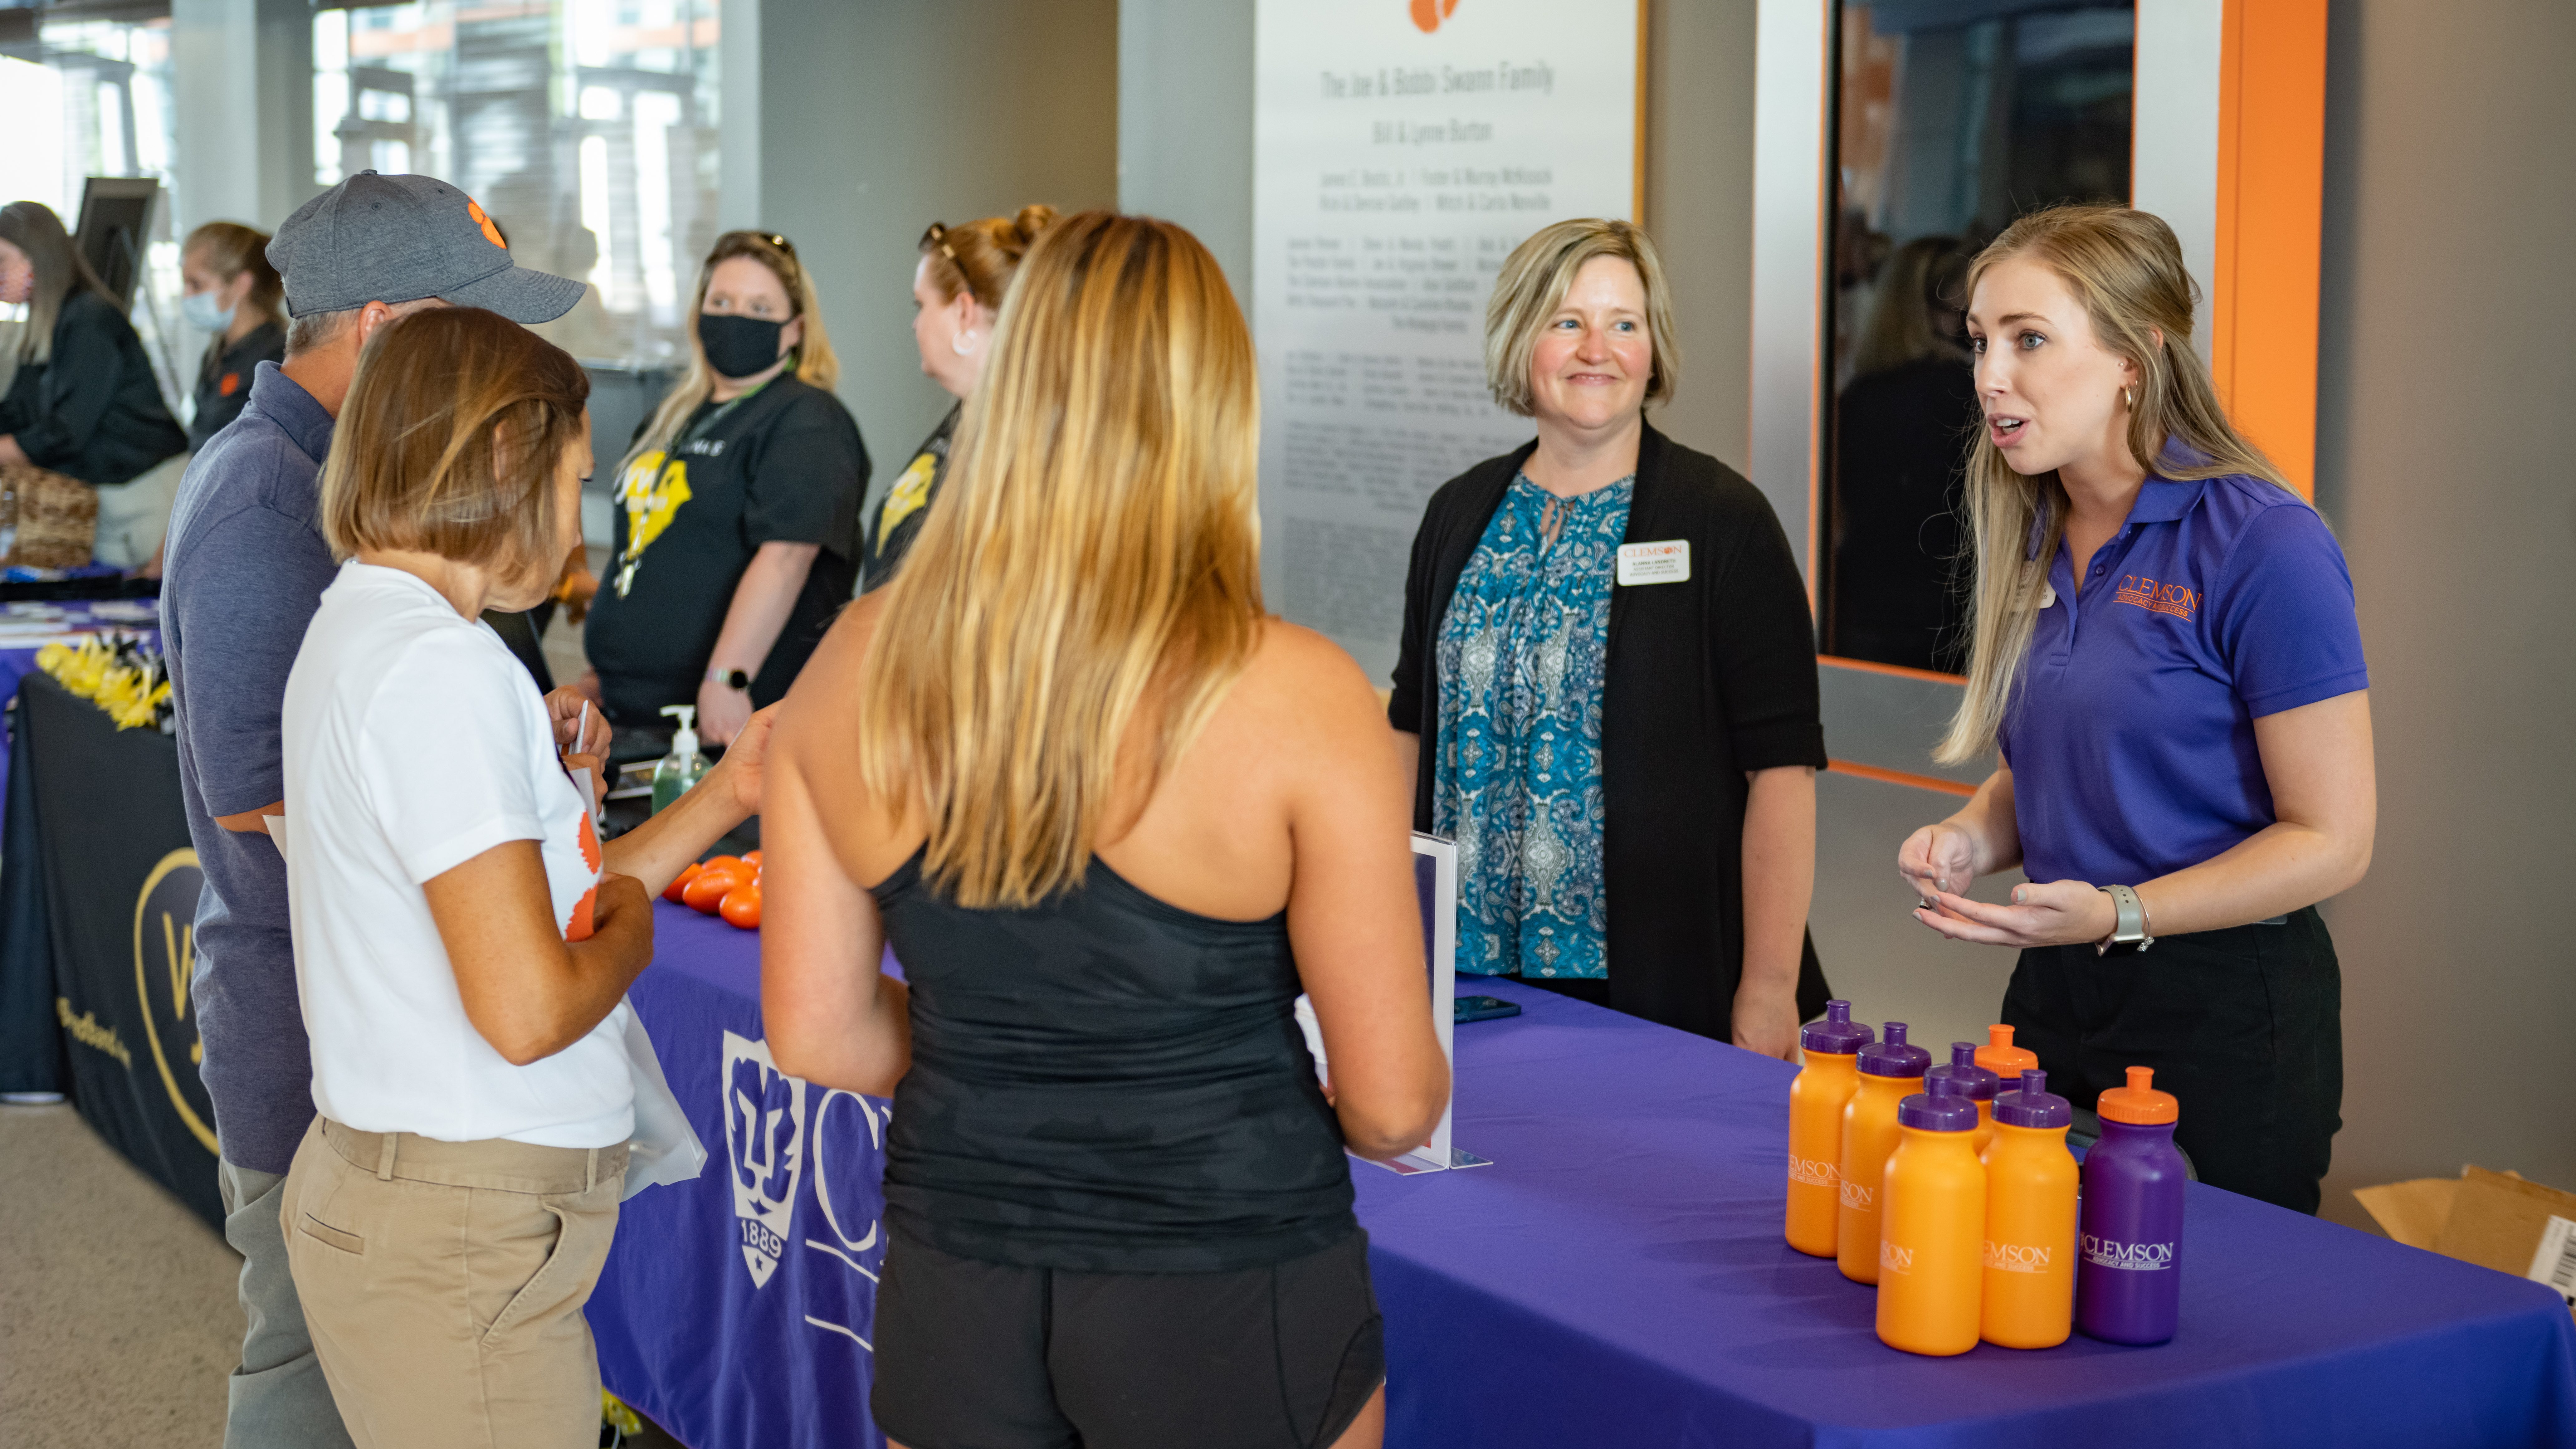 Alanna Landreth and Makayla Stark of the Office of Advocacy and Success table during the campus community showcase at Orientation in August 2021.